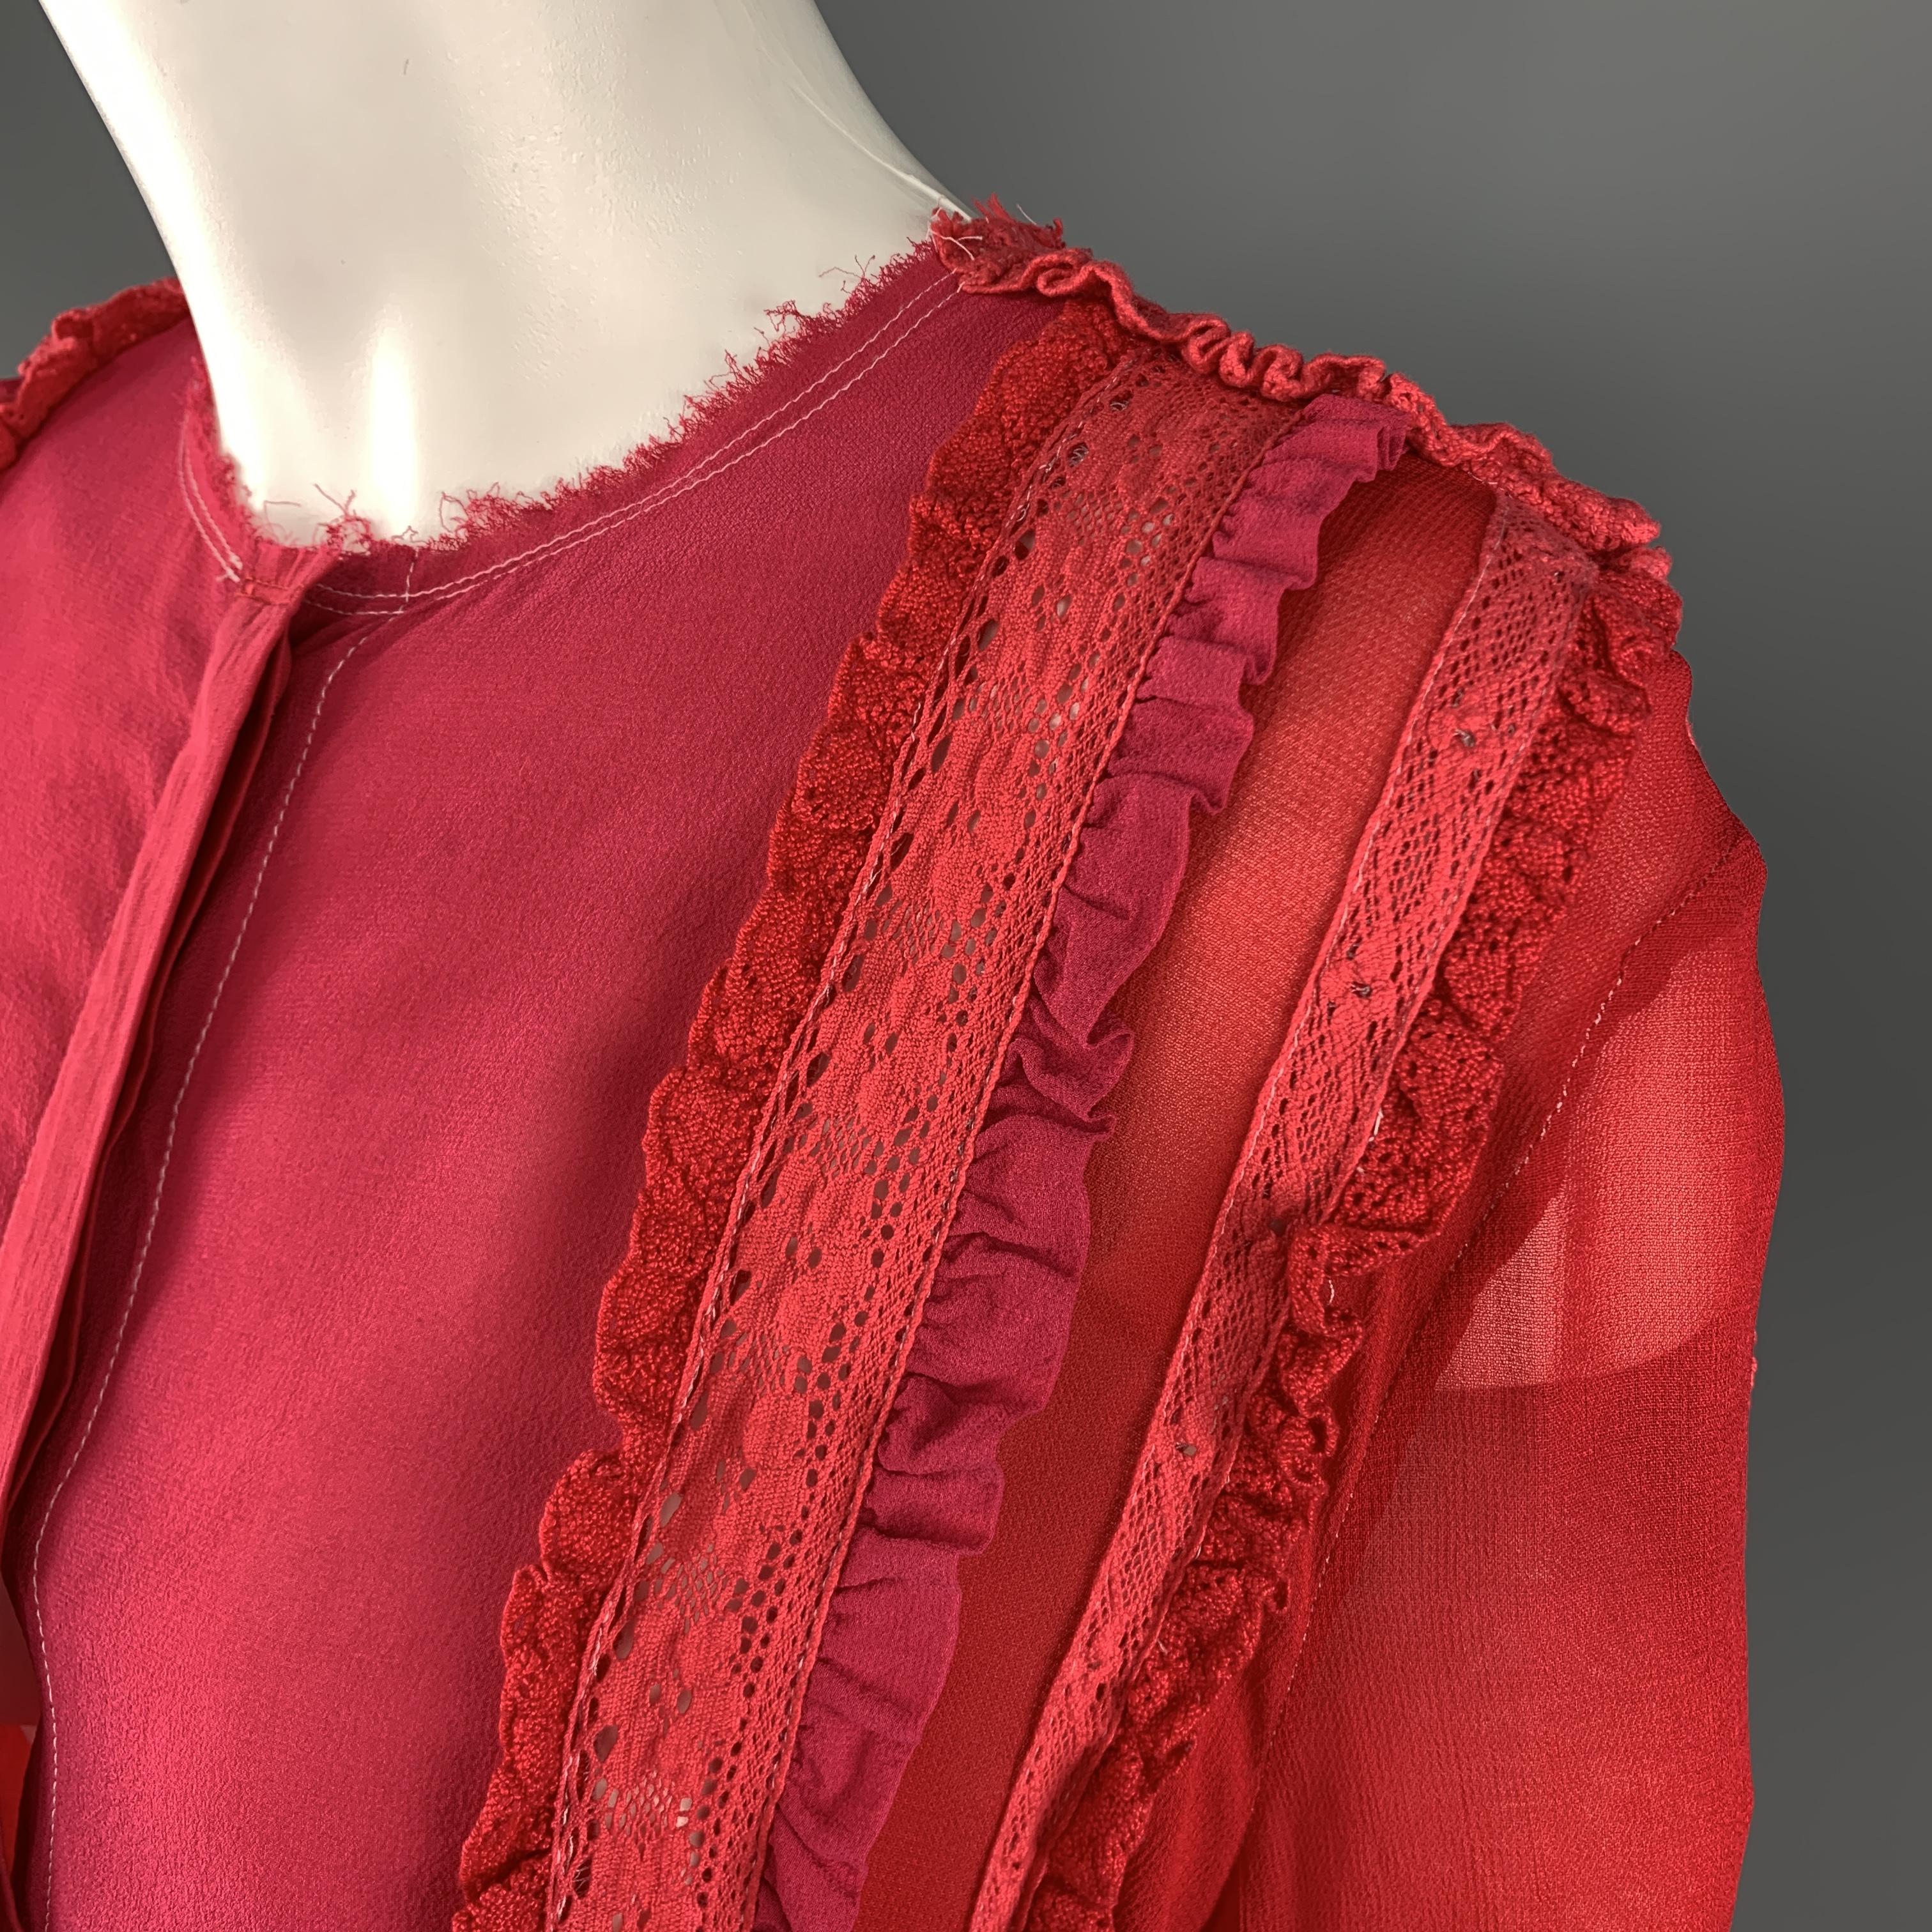 PREEN LINE blouse comes in fuchsia and red color block crepe chiffon with lace knit ruffled piping trim throughout and frayed collarless neckline.
 
Excellent Pre-Owned Condition.
Marked: S
 
Measurements:
 
Shoulder: 17 in.
Bust: 44 in.
Sleeve: 21